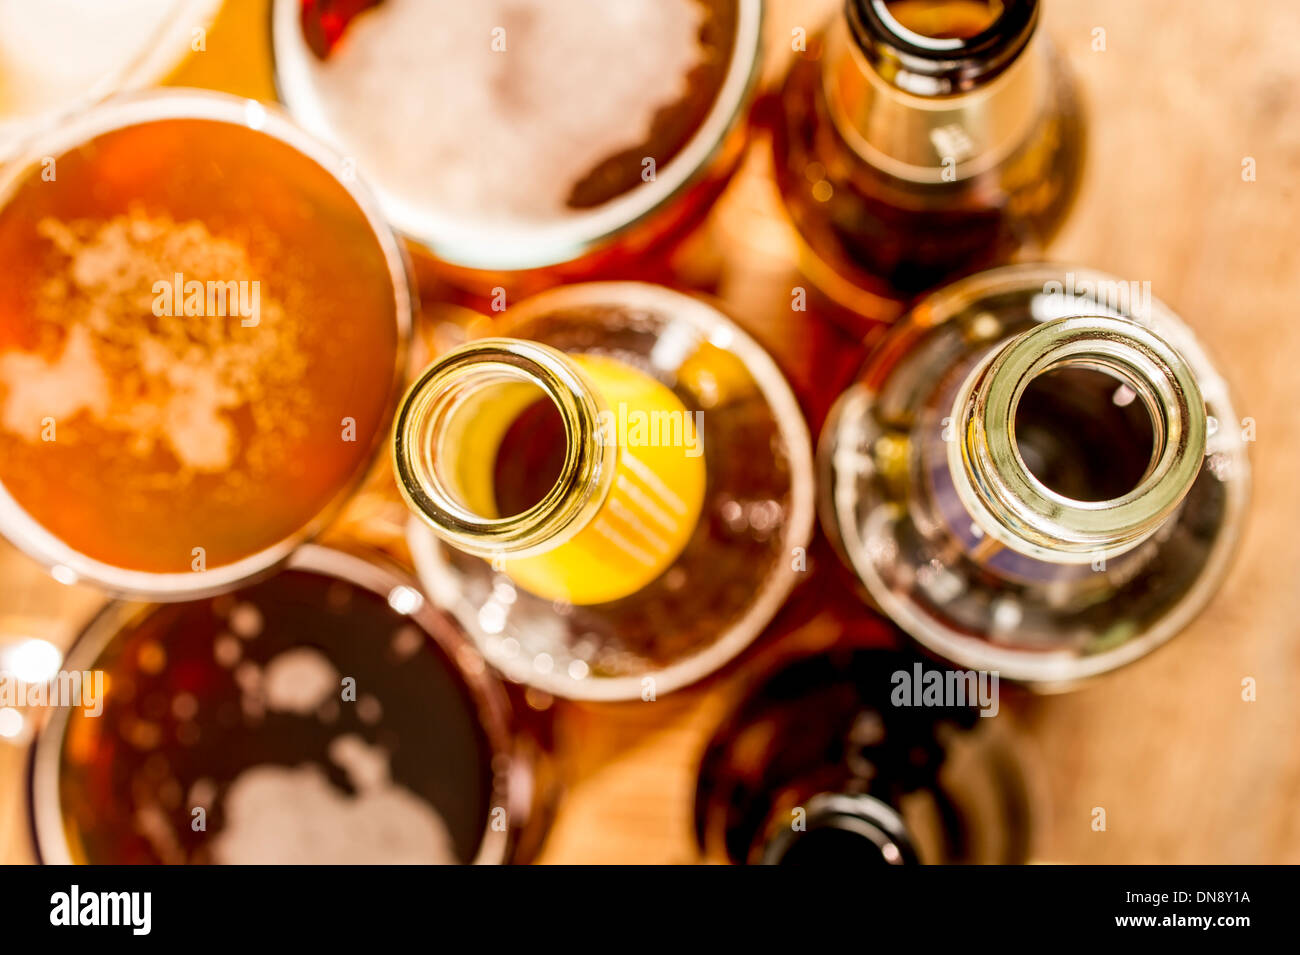 Pints of ale and beer in glasses on a table, UK Stock Photo